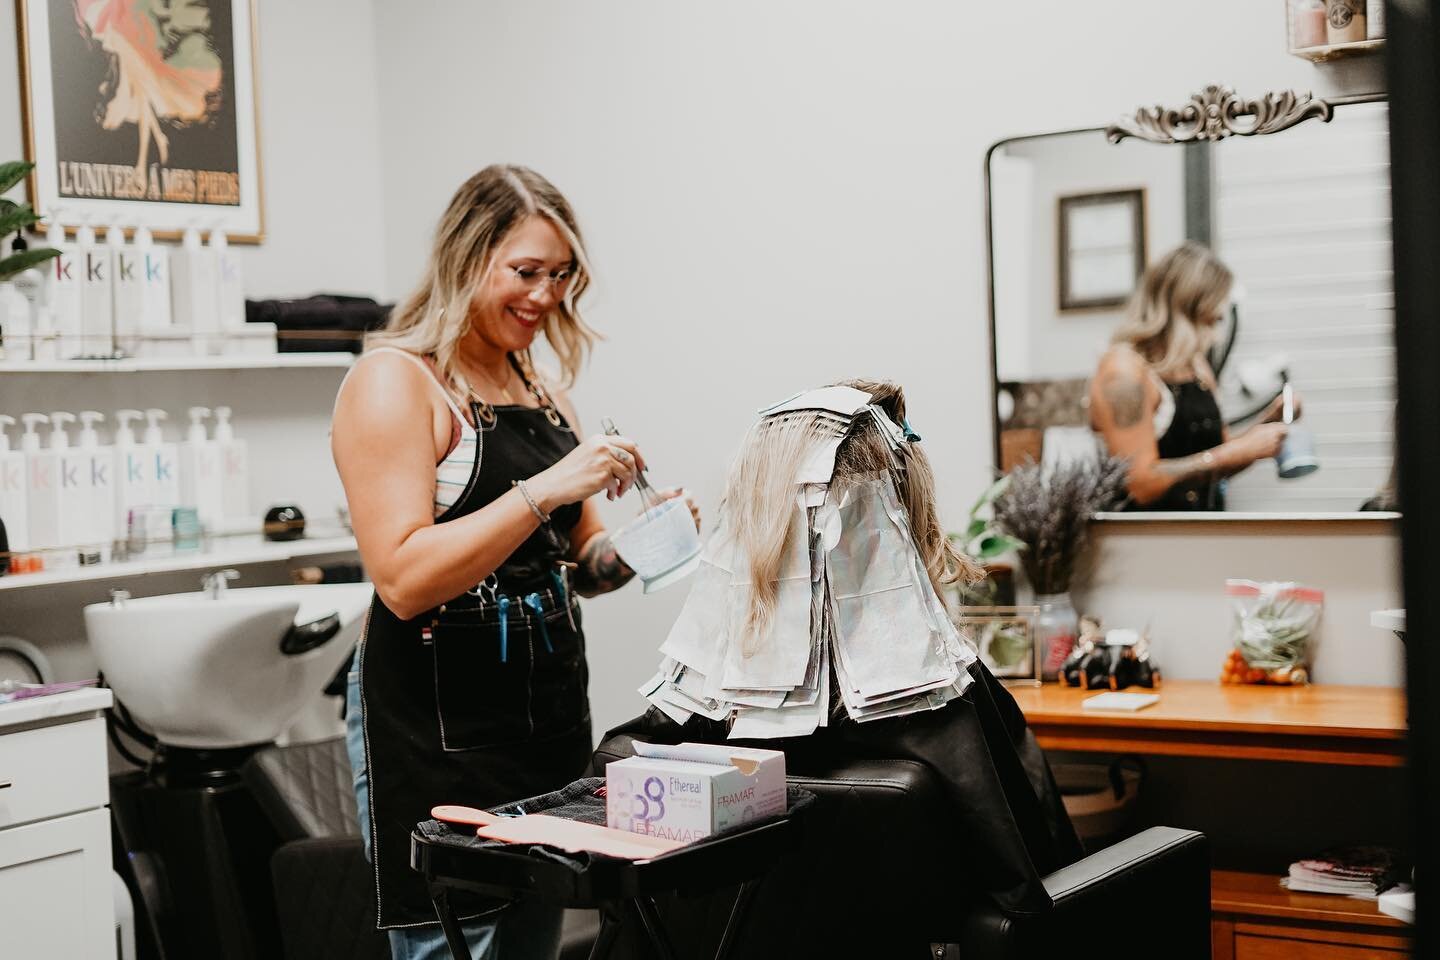 &ldquo;I never dreamed about success. I worked for it.&rdquo; 
-Estee Lauder
&bull;
&bull;
&bull;
&bull;
&bull;
&bull;
&bull;
&bull;
#luxsalonsuites #hairstyles #salonprofessional #cosmetology #blondes #beachwaves #dimension #hair #prospertexas #fema